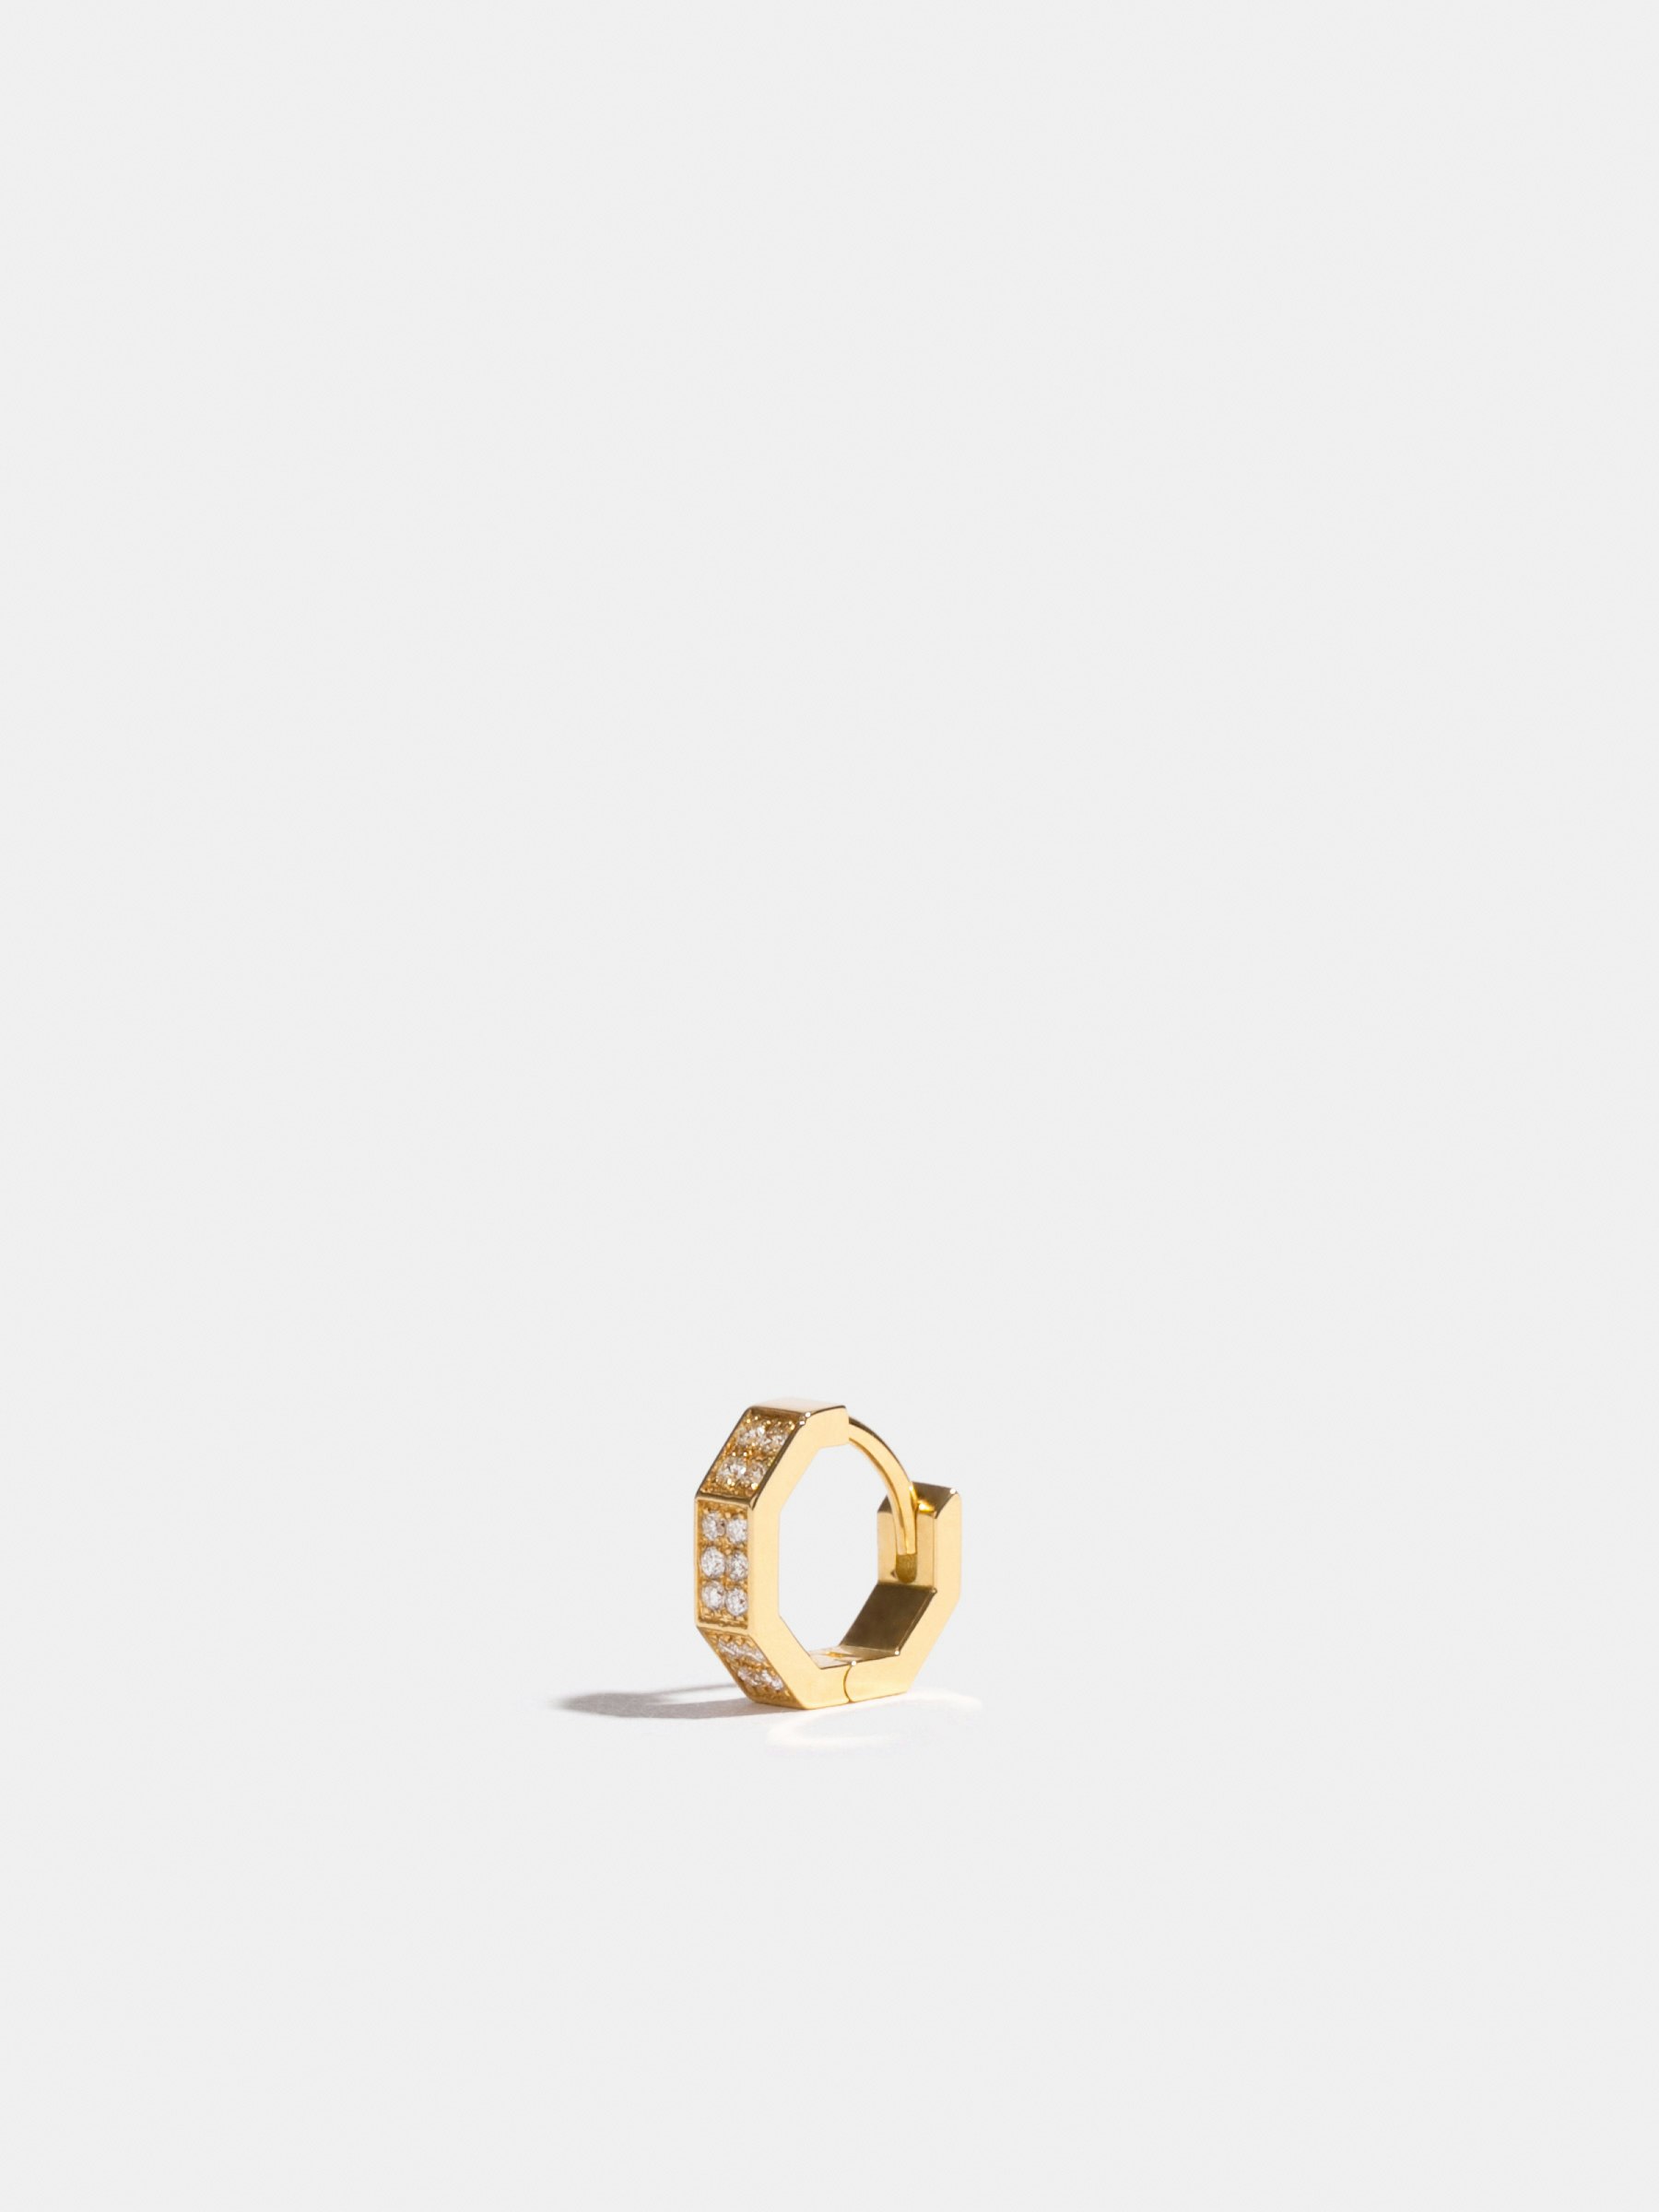 Octogone single-loop in 18k Fairmined ethical yellow gold, paved with lab-grown diamonds, the unity.